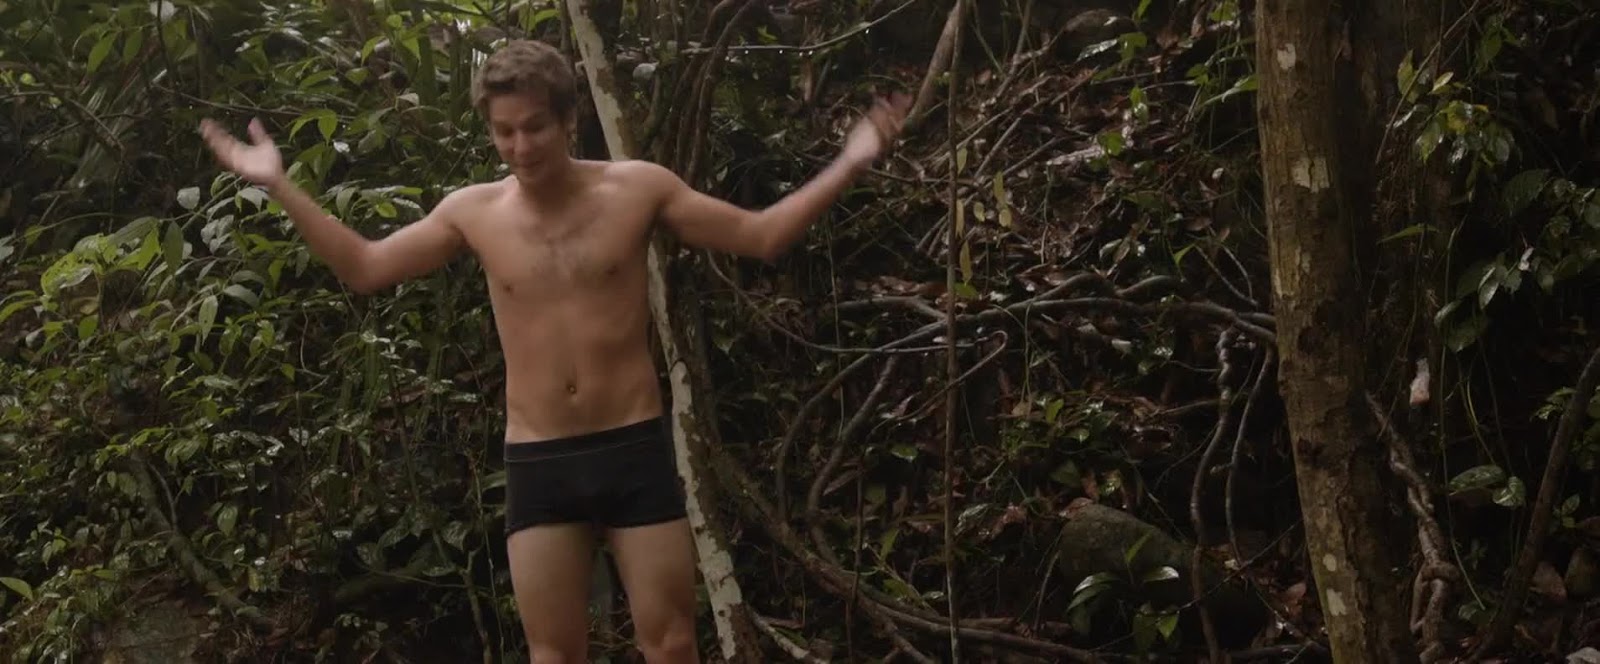 The Stars Come Out To Play: Devon Werkheiser - Shirtless, Barefoot & Na...